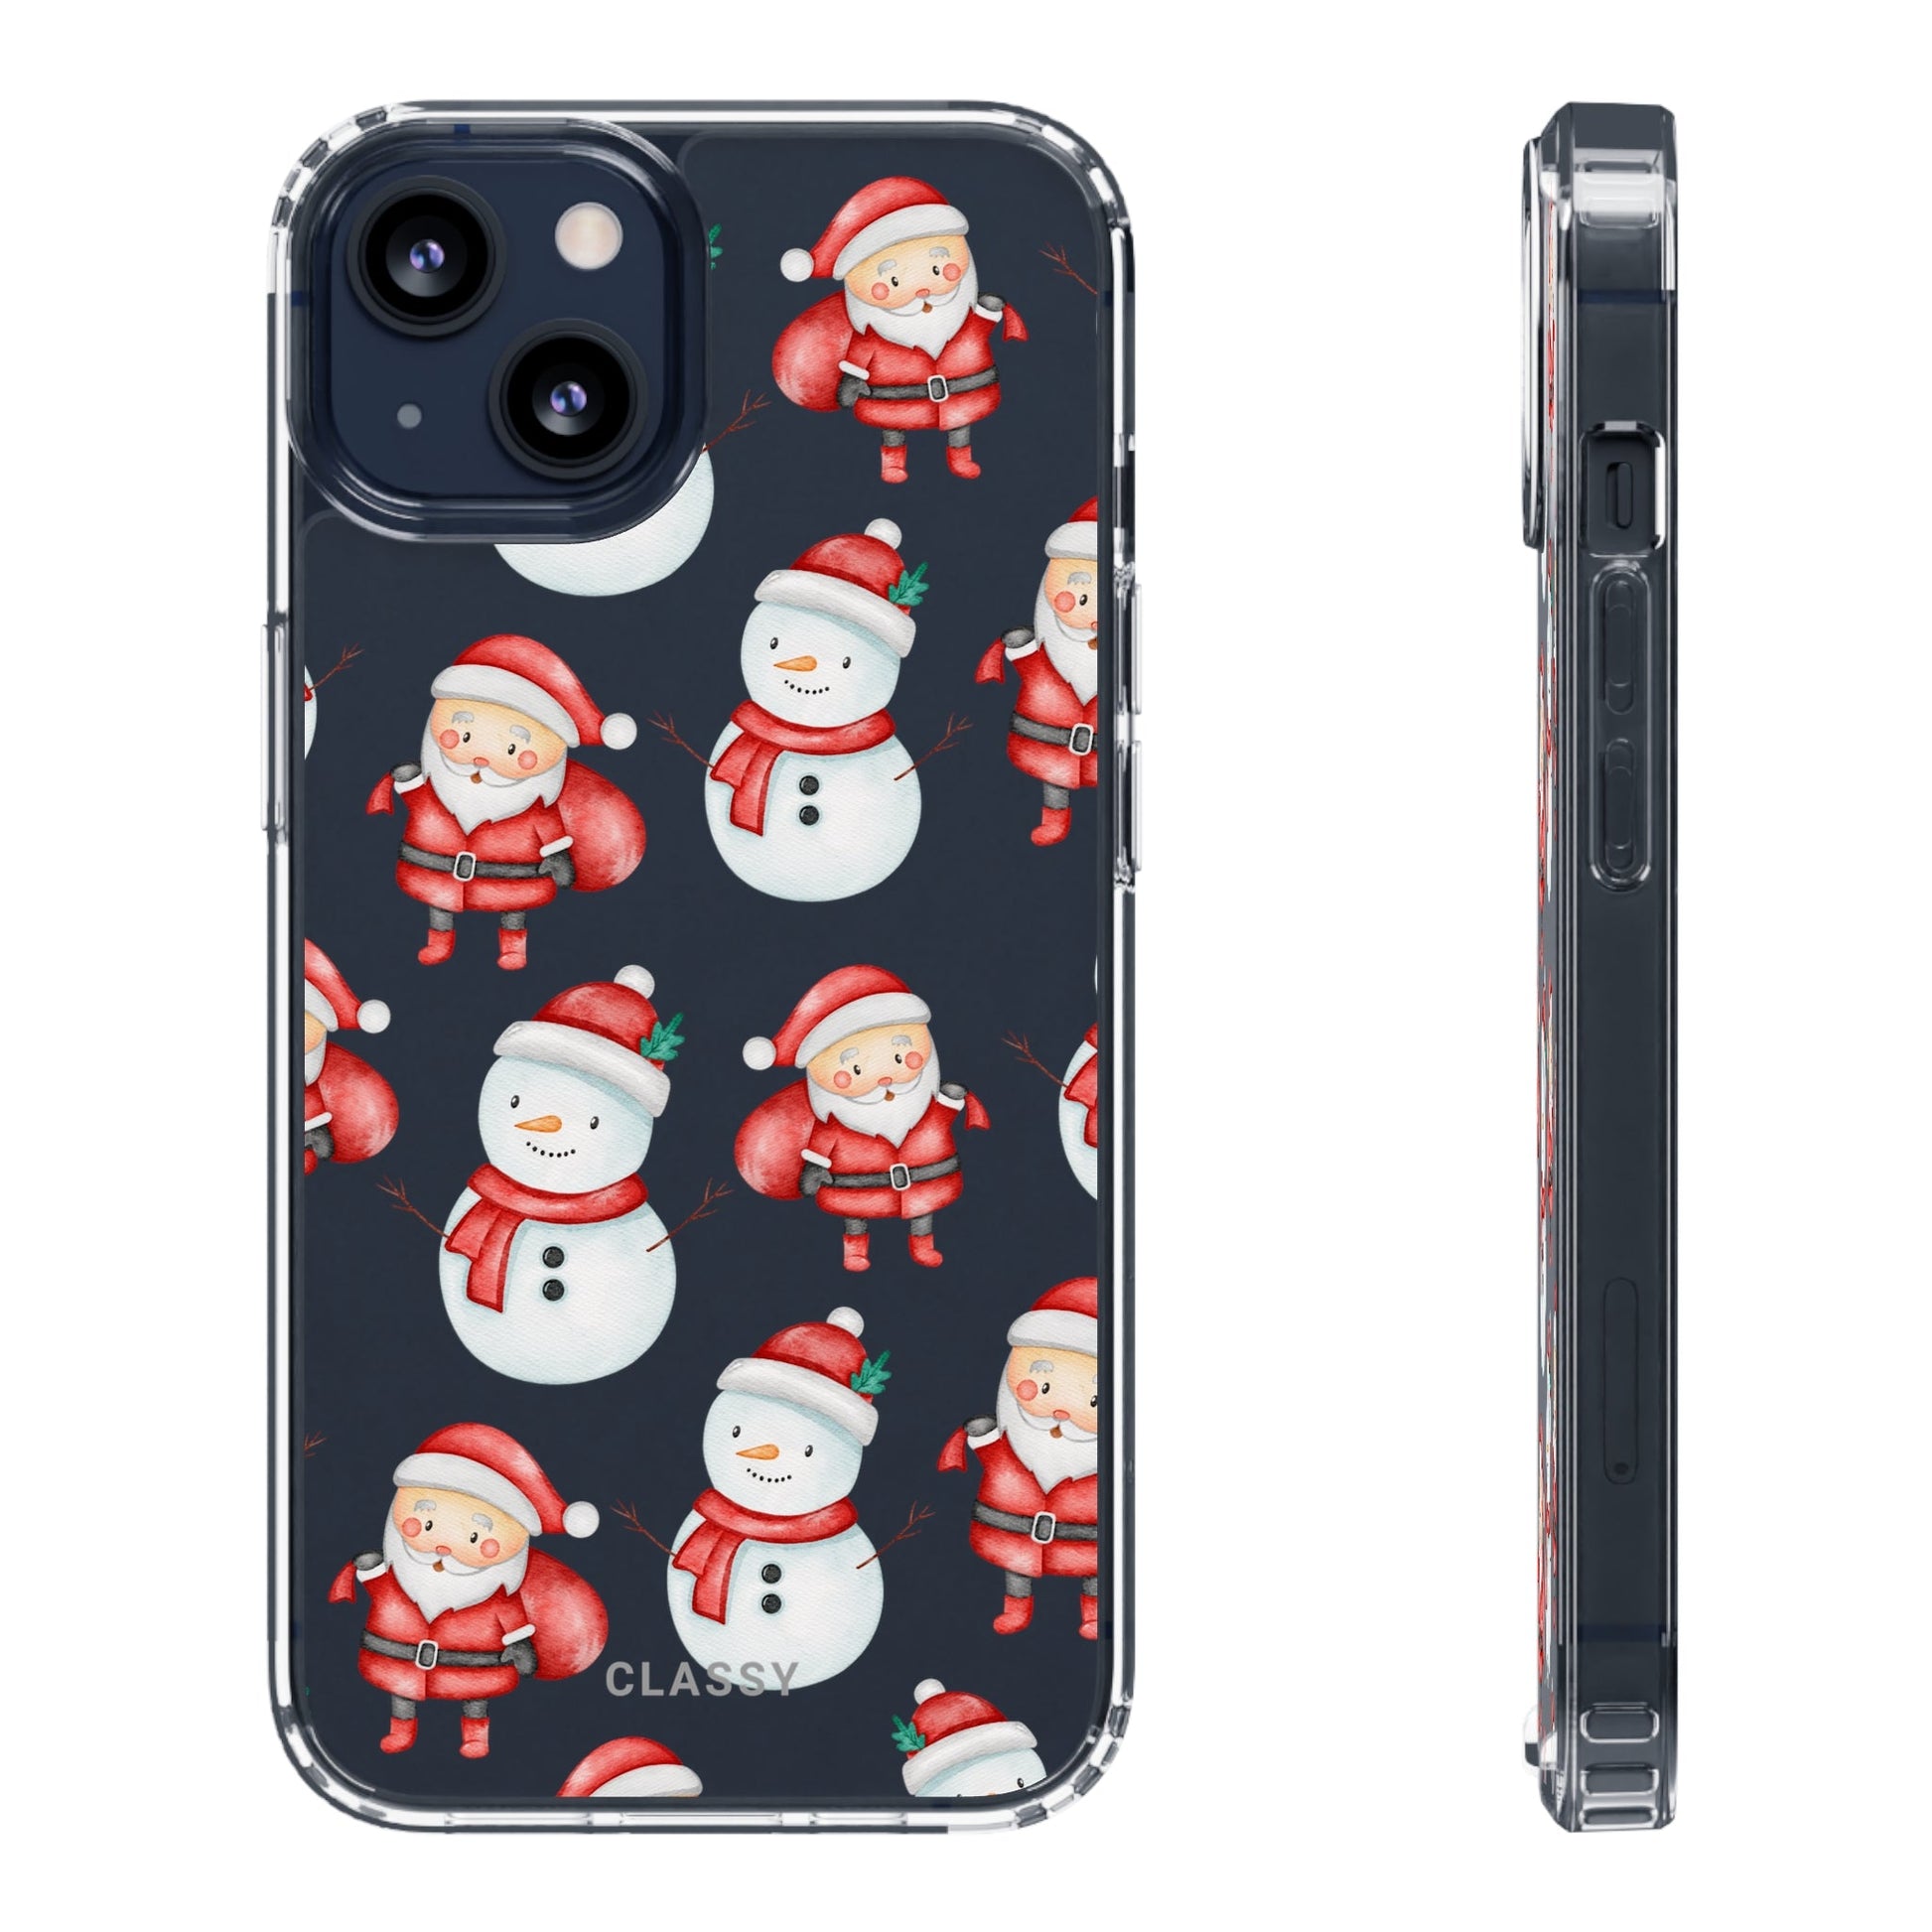 Christmas Clear Case with Snowman and Santa - Classy Cases